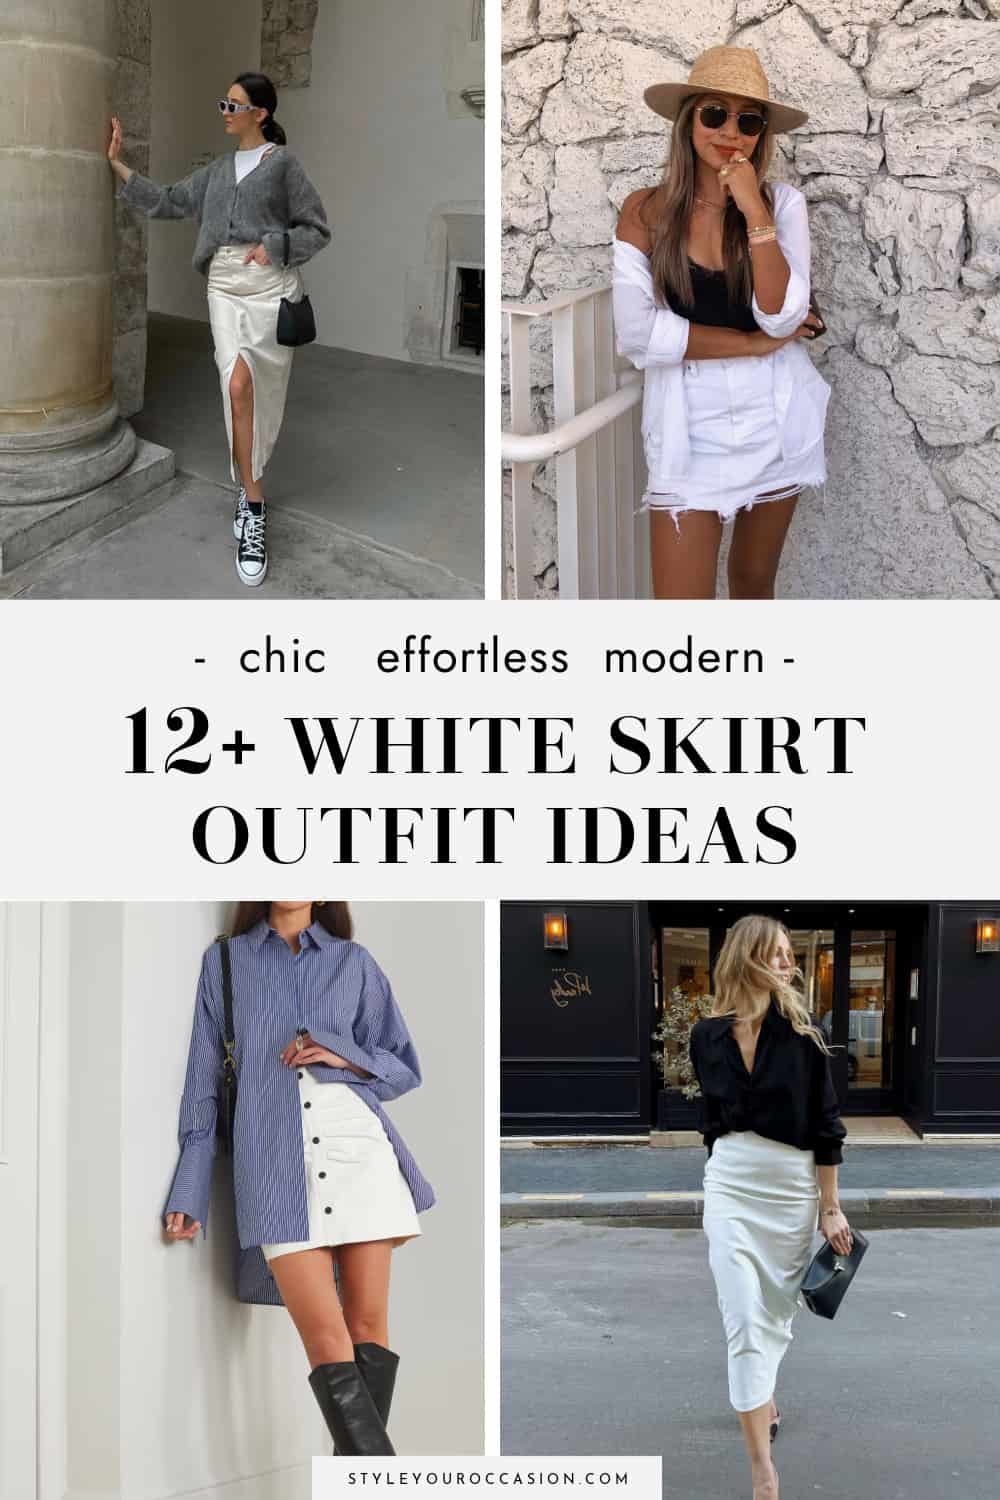 12+ Elevated White Skirt Outfit Ideas: A Fresh Take On This Classic